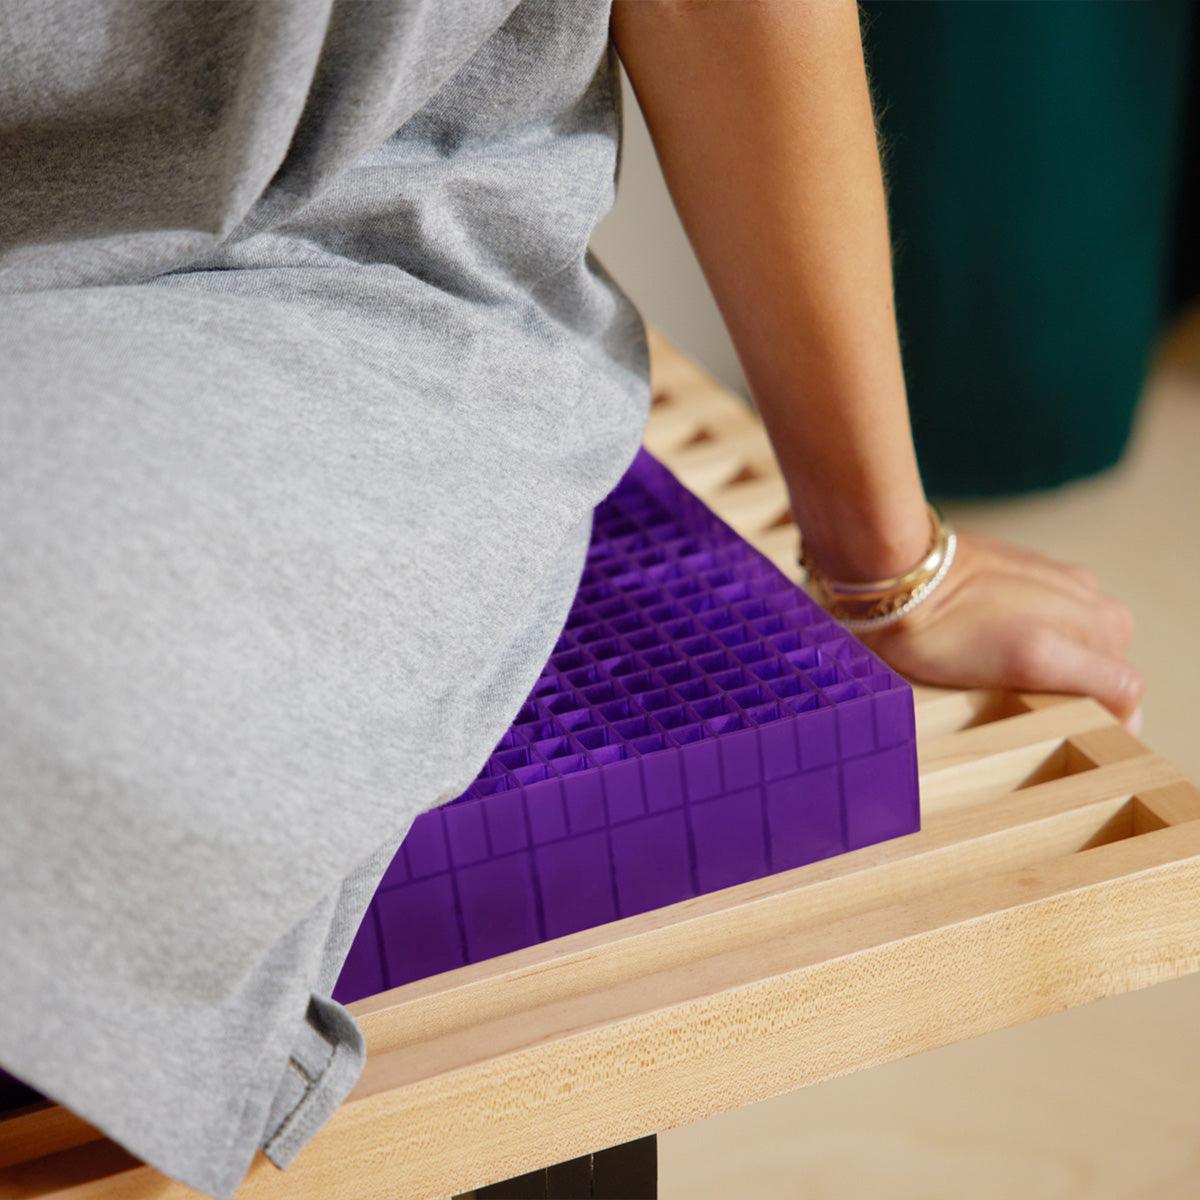 Woman Sitting On The Purple Grid Used In The Purple Double Seat Cushion